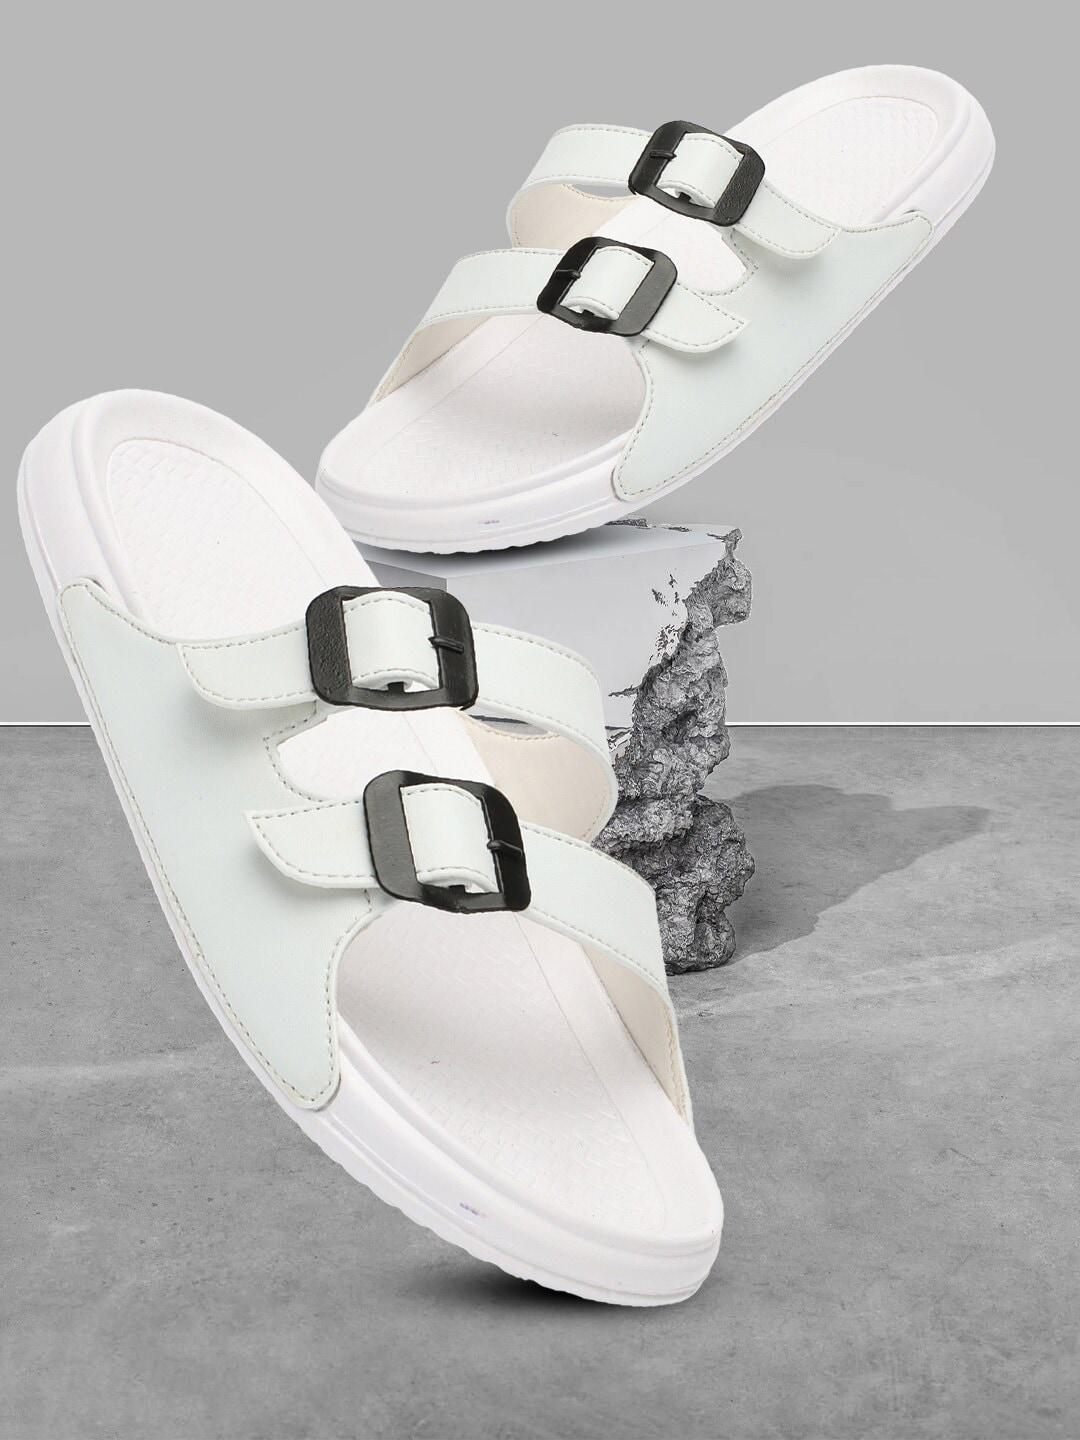 pery pao men two strap sliders with buckle detail